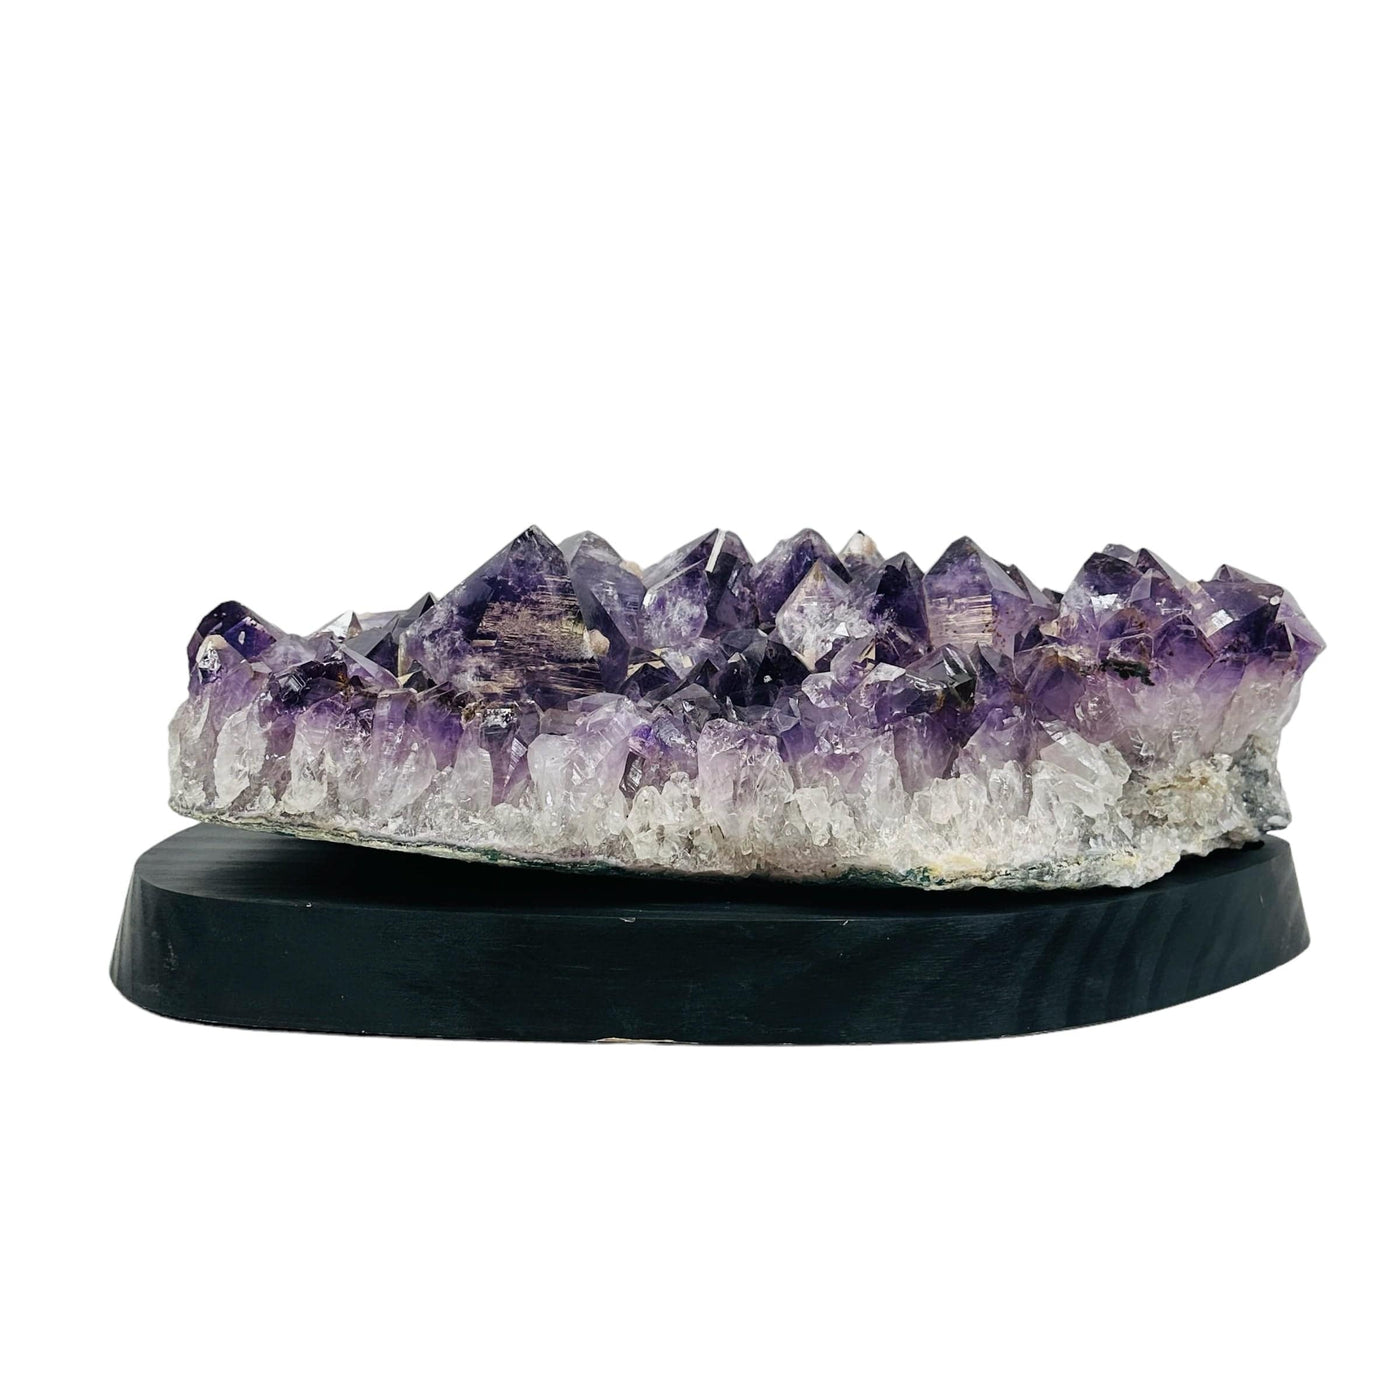 back side of the large amethyst on wooden stand 